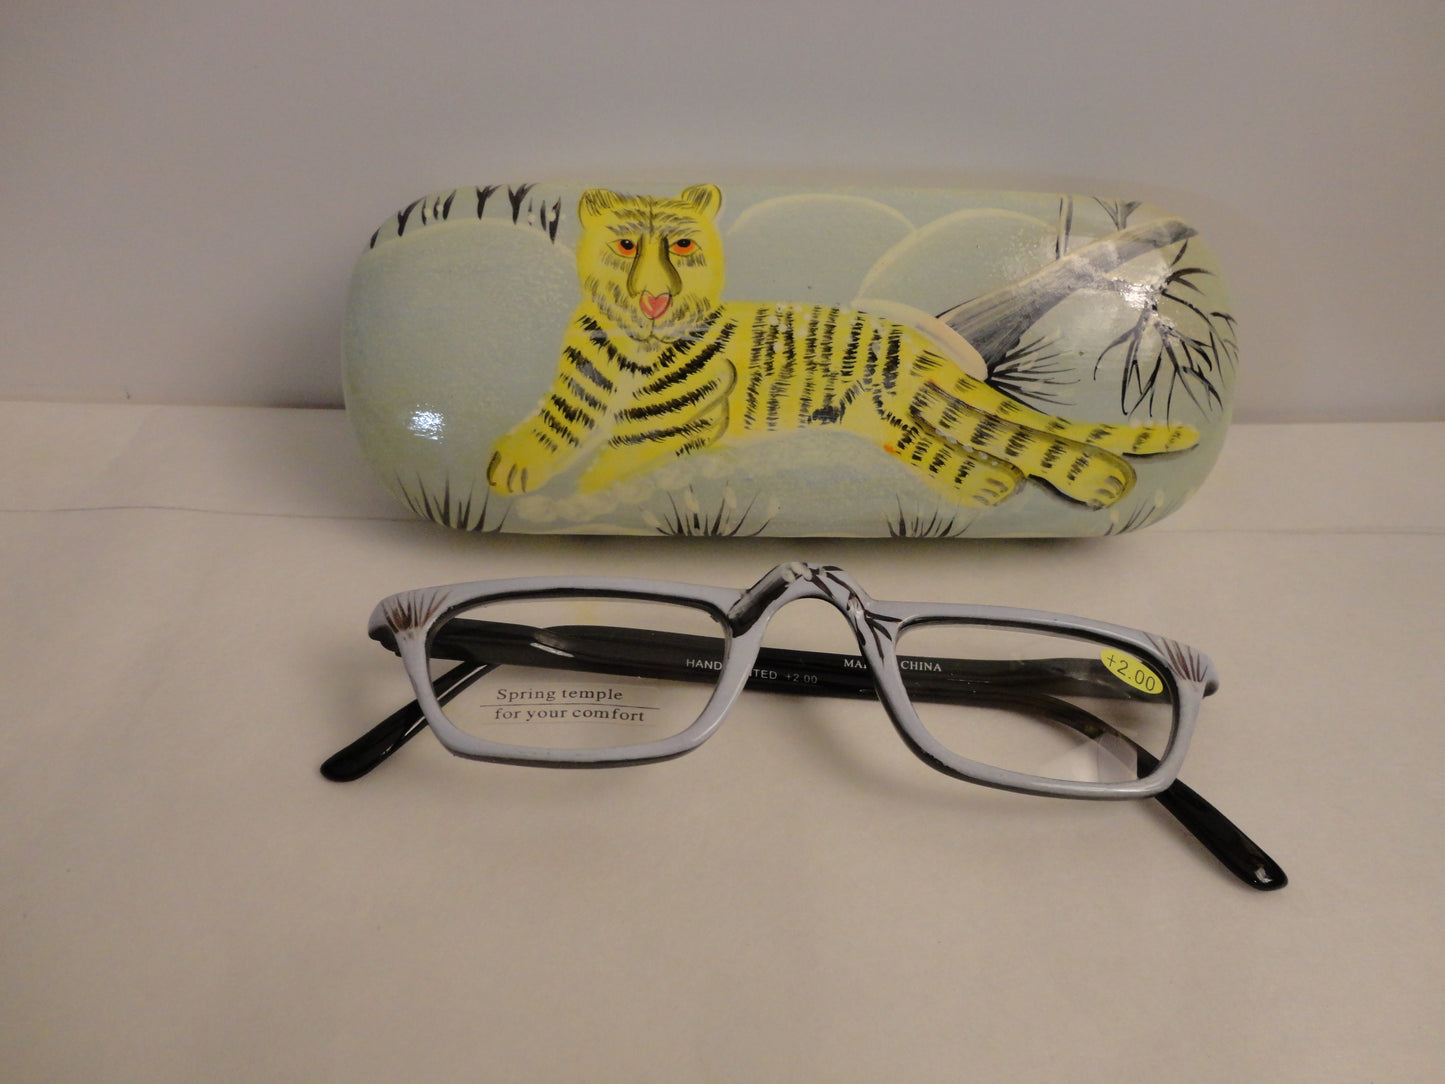 Readers Hand Painted Lion NWT/In Box SKU 200-35